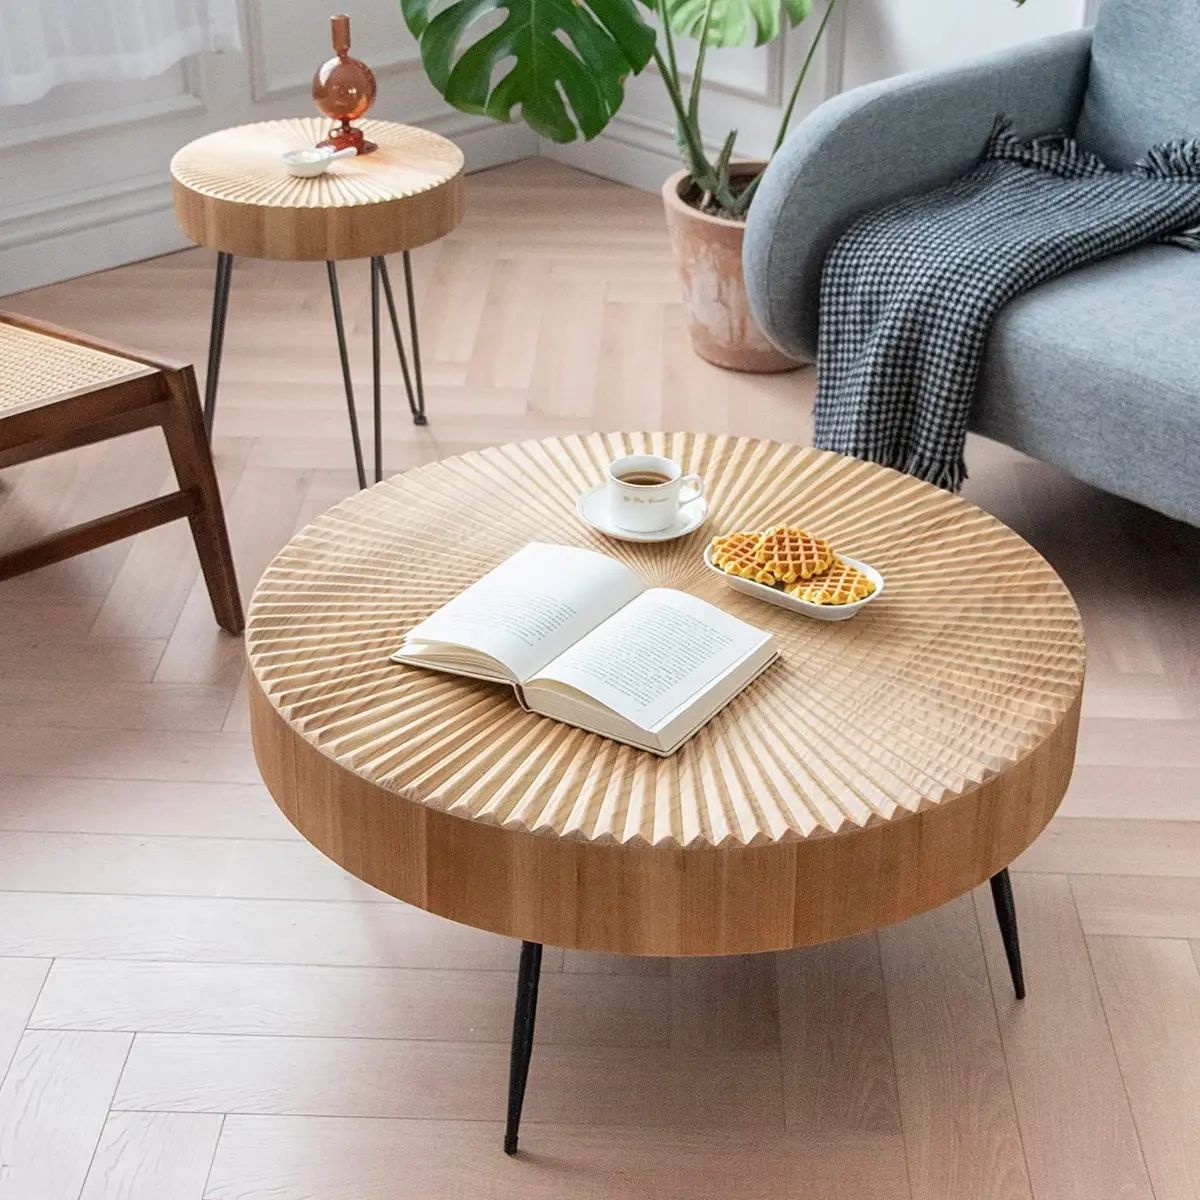 2 Piece Modern Farmhouse Living Room Coffee Table Set, Nesting Table Round  With | Ebay Within Modern Farmhouse Coffee Table Sets (View 2 of 15)